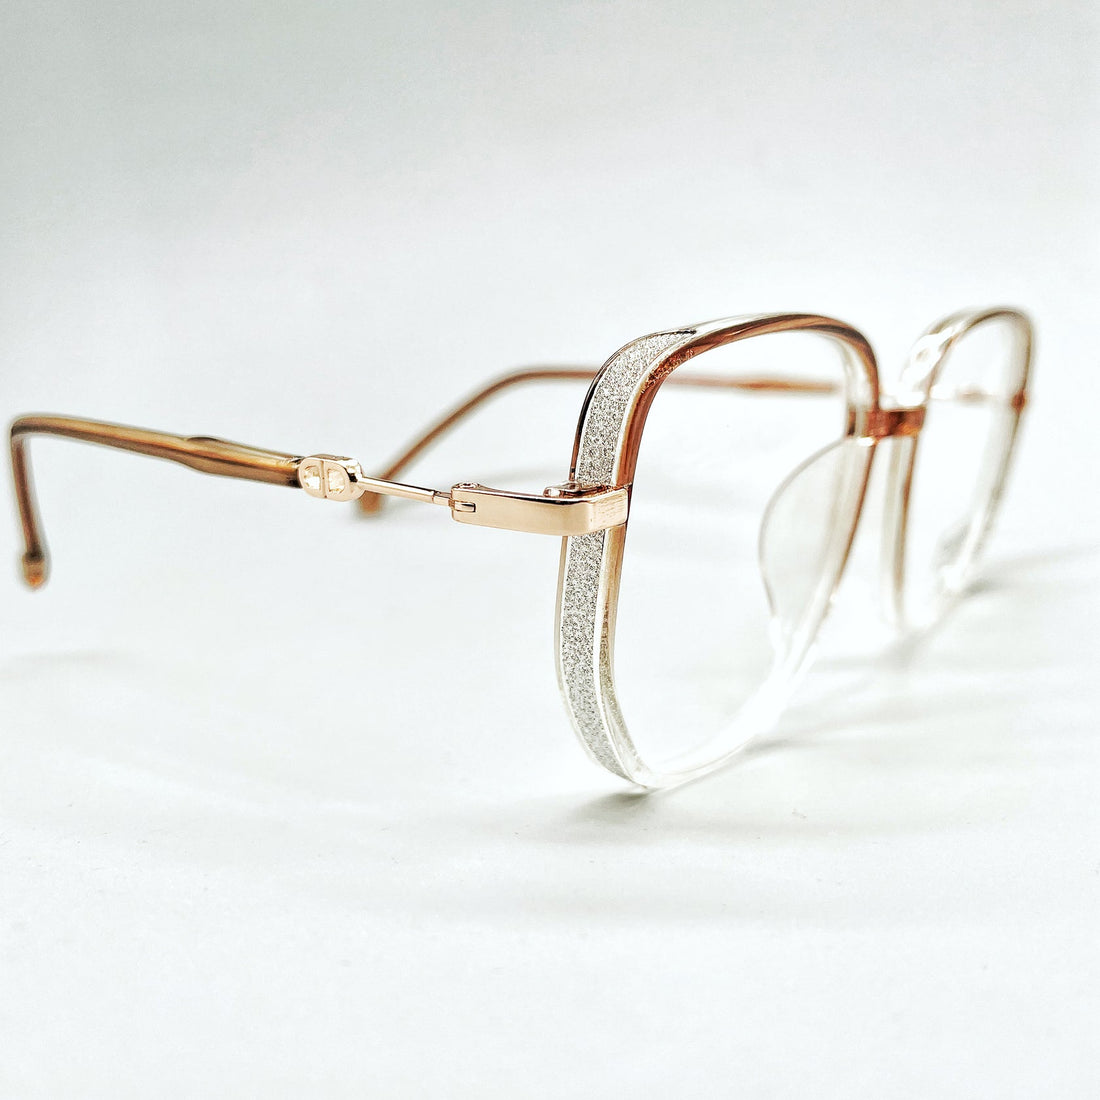 Clear Frame Glasses: The Ultimate Accessory for a Modern Look